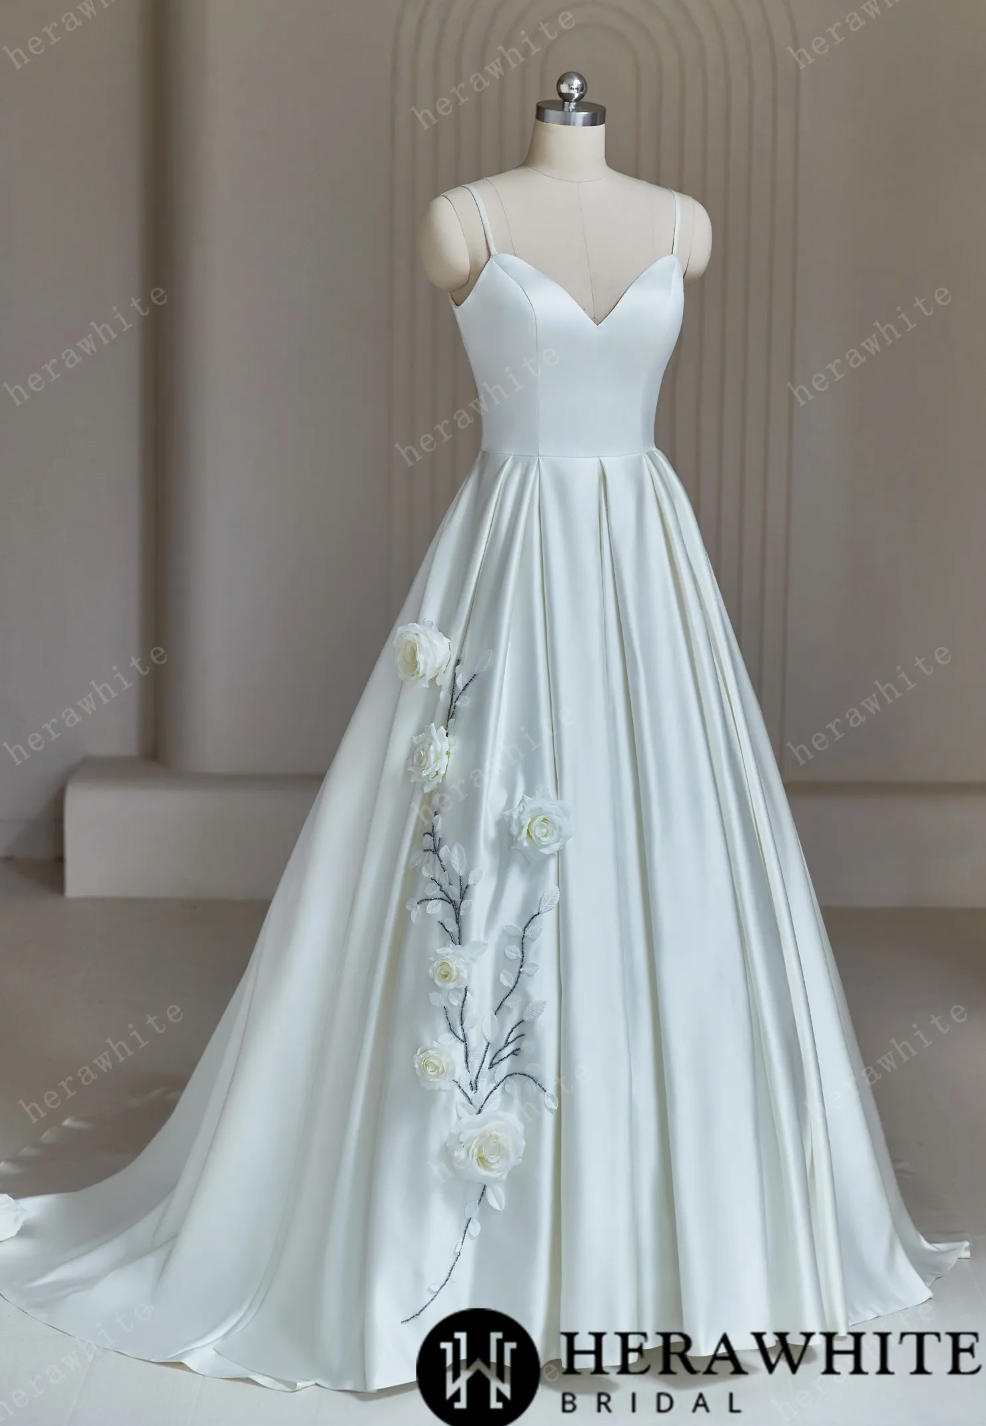 Sophisticated A-Line Wedding Dress With Spaghetti Straps